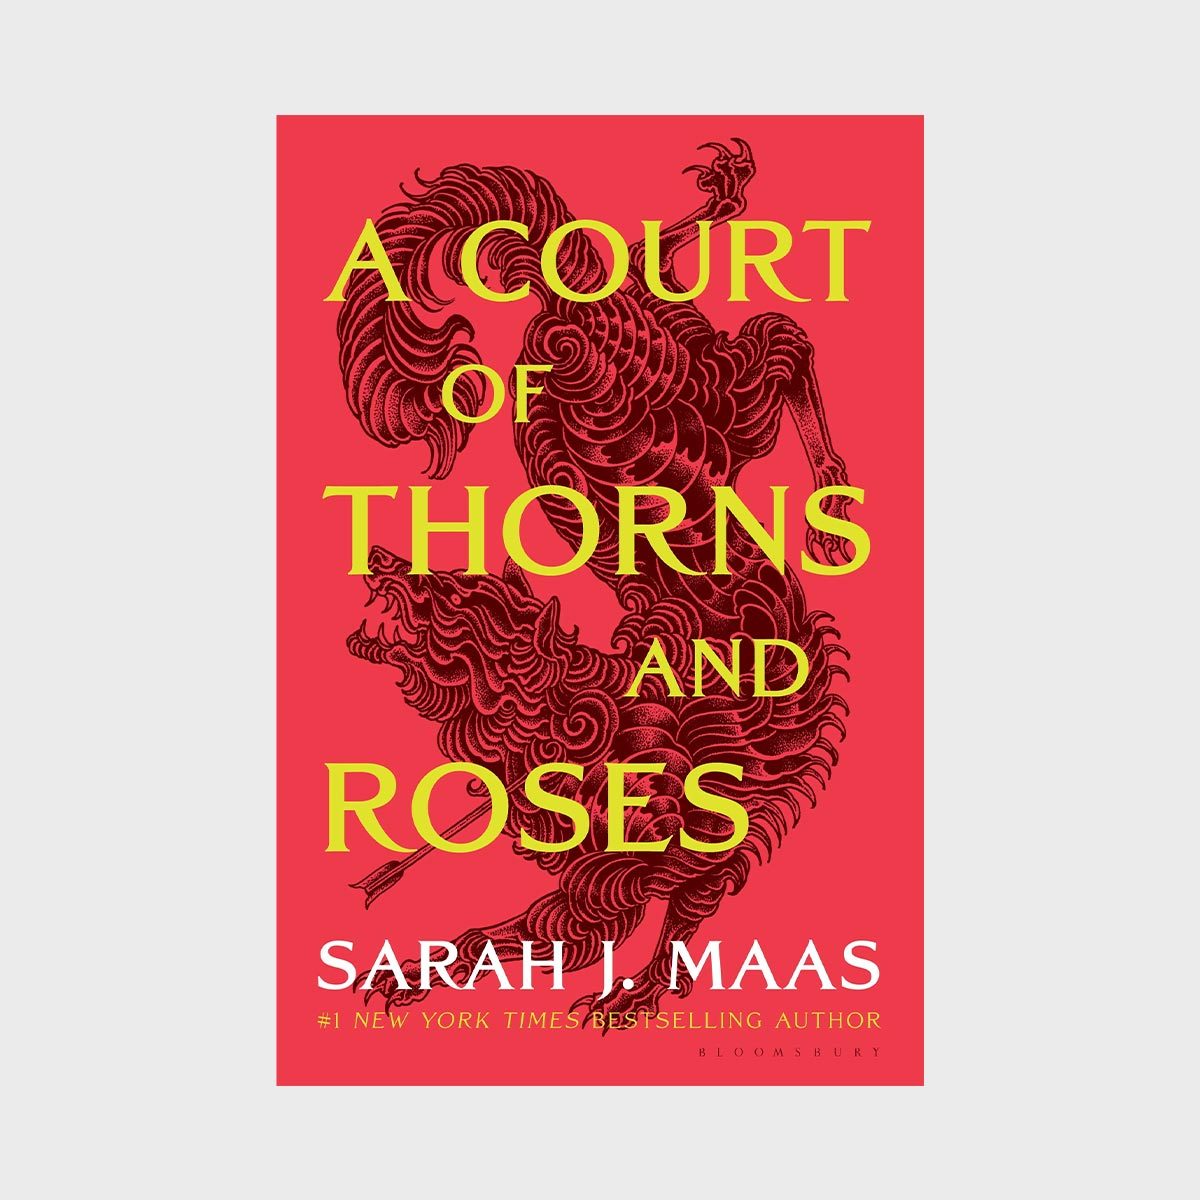 A Court Of Thorns And Roses By Sarah J. Maas